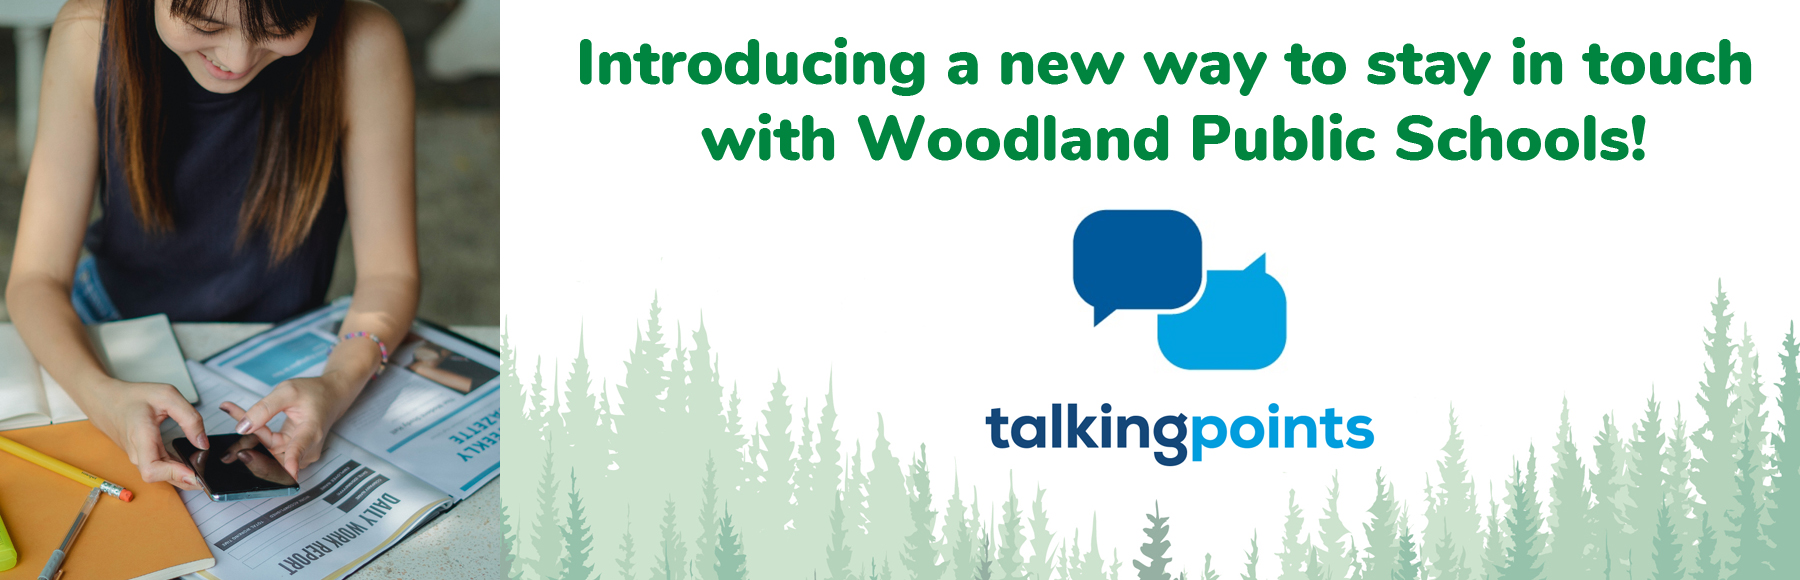 Introducing a new way for Woodland’s families and students to stay in touch with their teachers and schools – TalkingPoints!